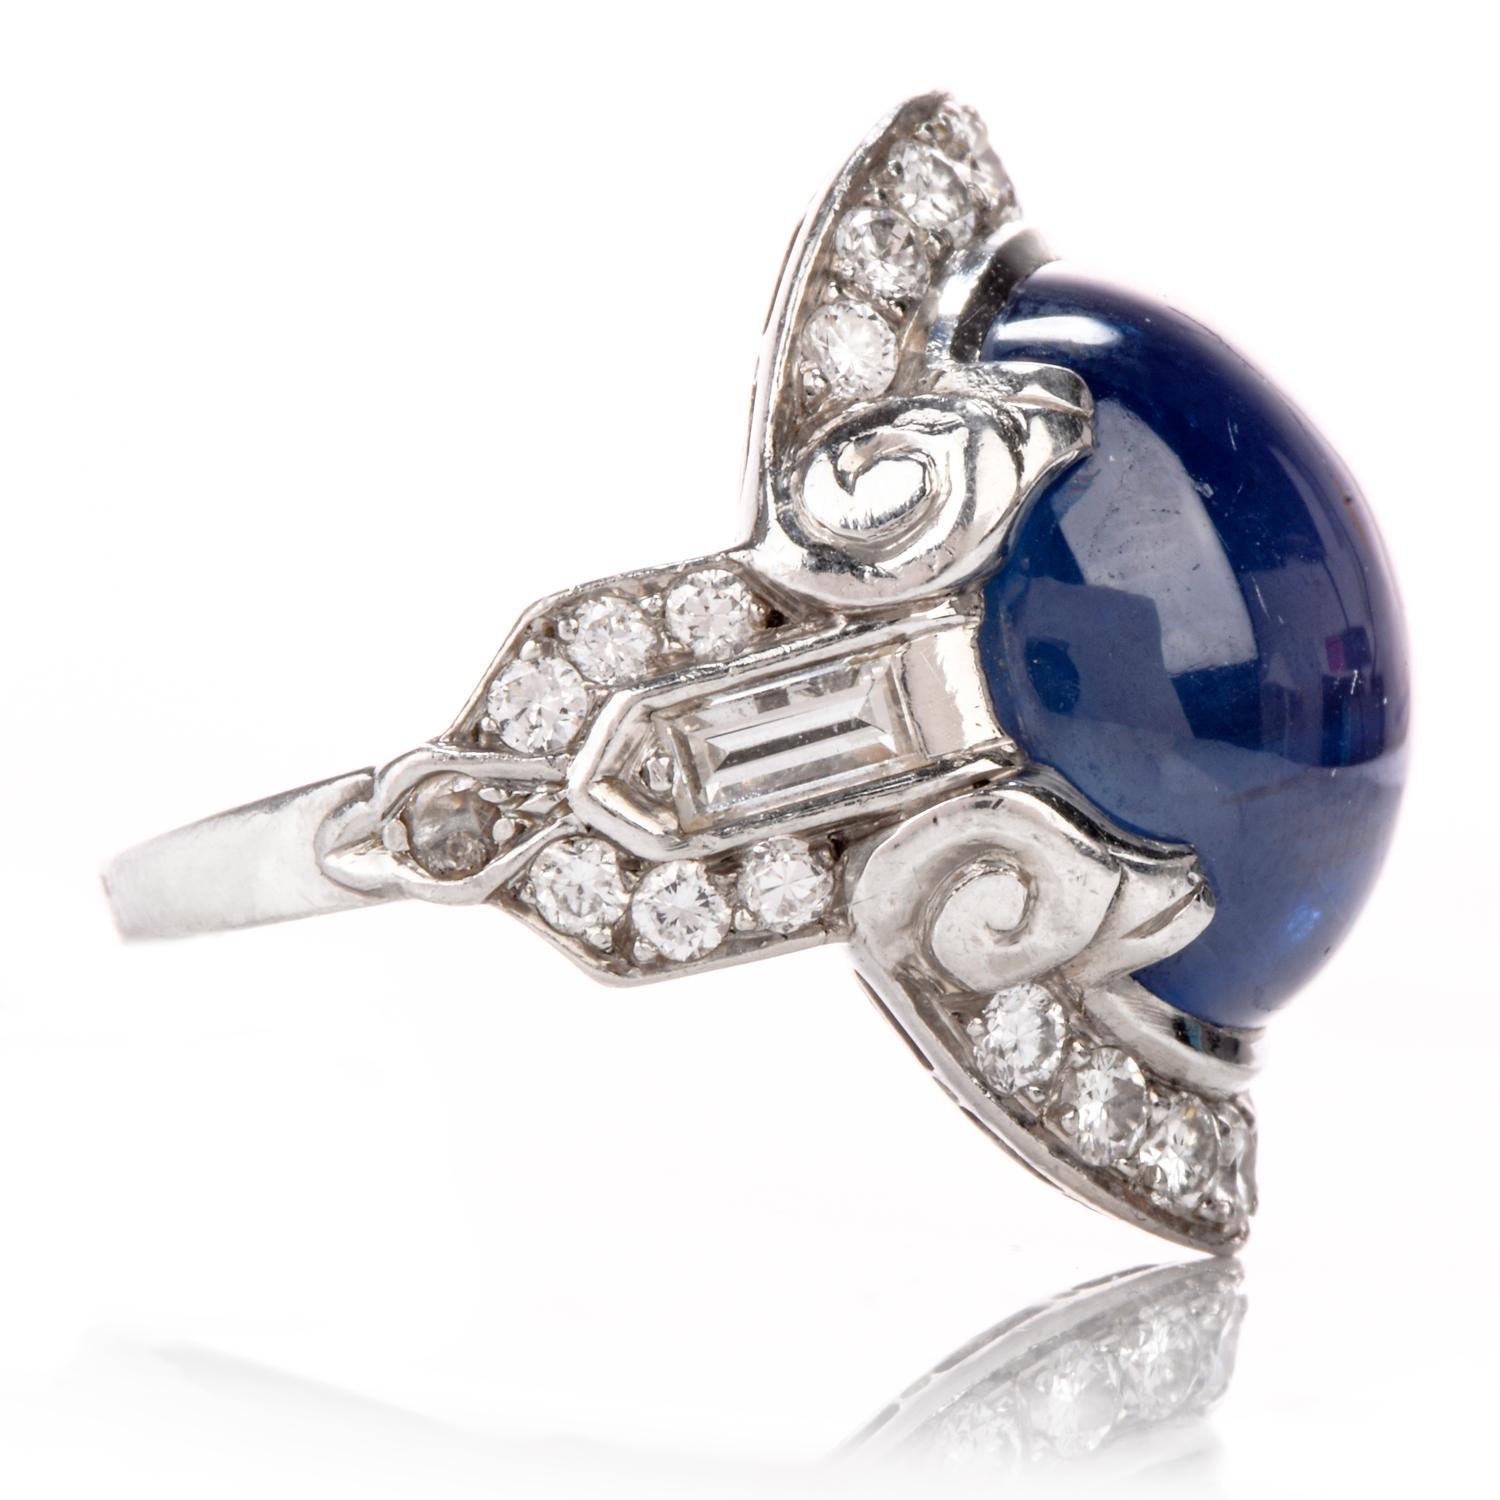 This pristine condition antique Diamond and Blue Star Burma Sapphire ring was inspired in  a Gothic design and crafted in Platinum.

Prominently showcased in the center is a cabochon Blue Star All Natural No-Heat Sapphire comes with GIA Lab report